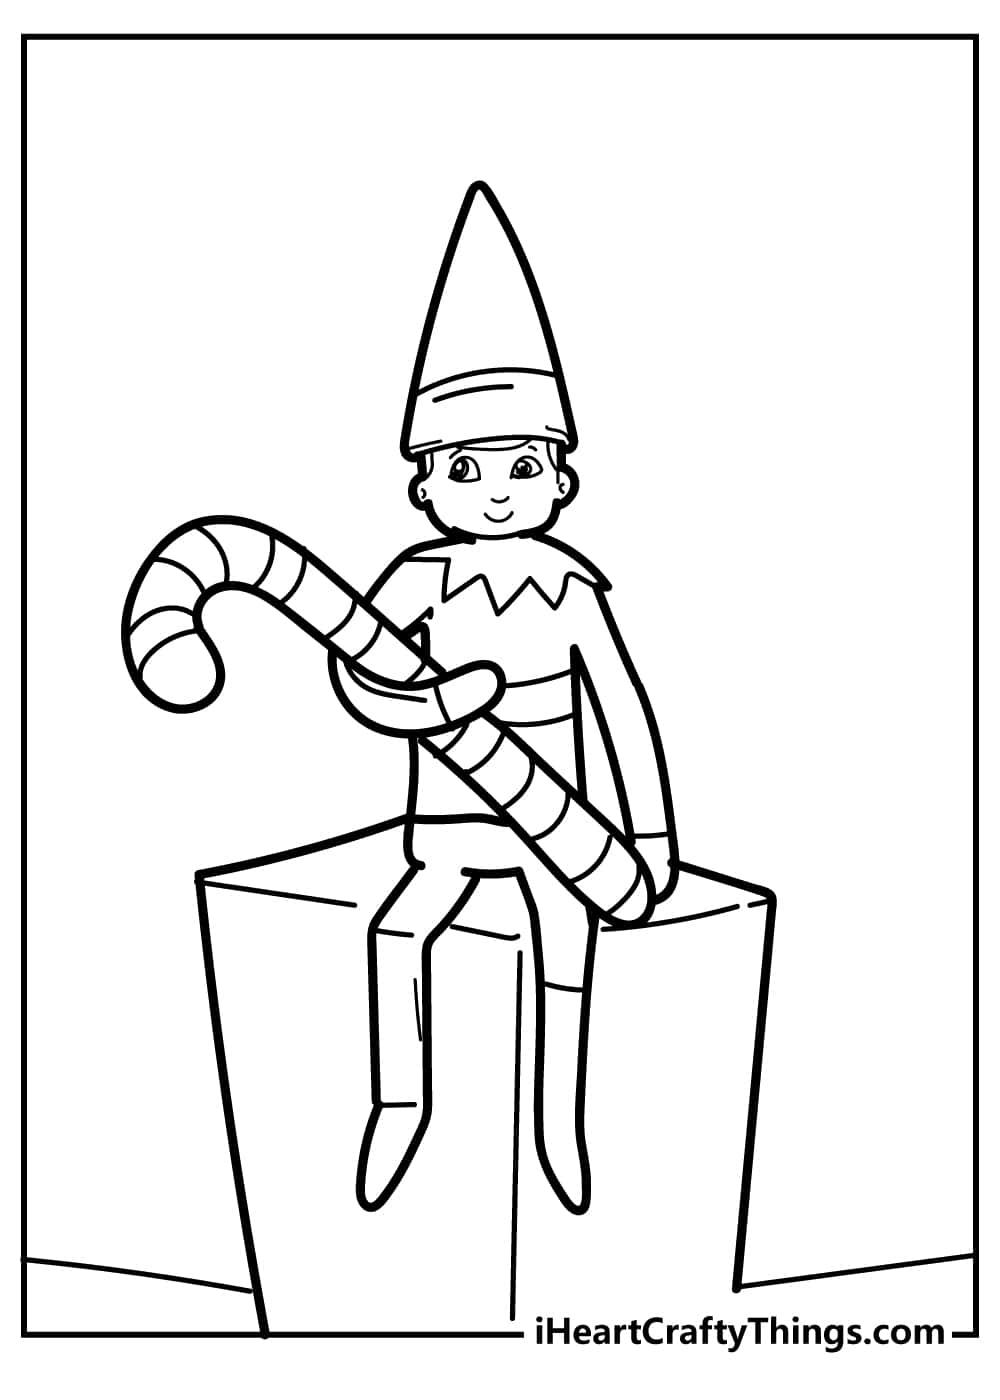 candy cane elf on the shelf coloring page